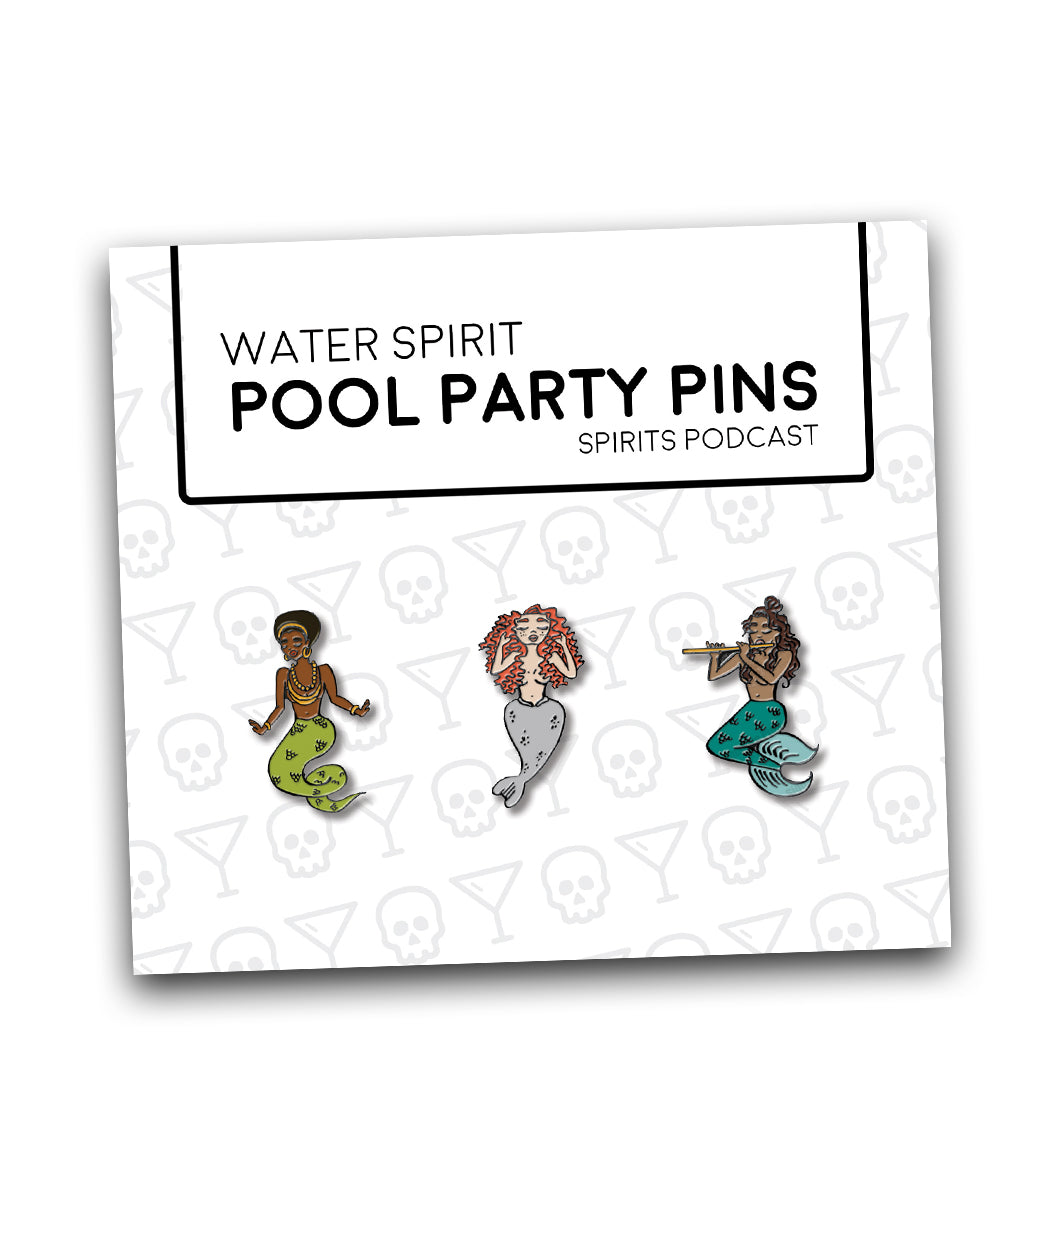 Pin on Your Party!